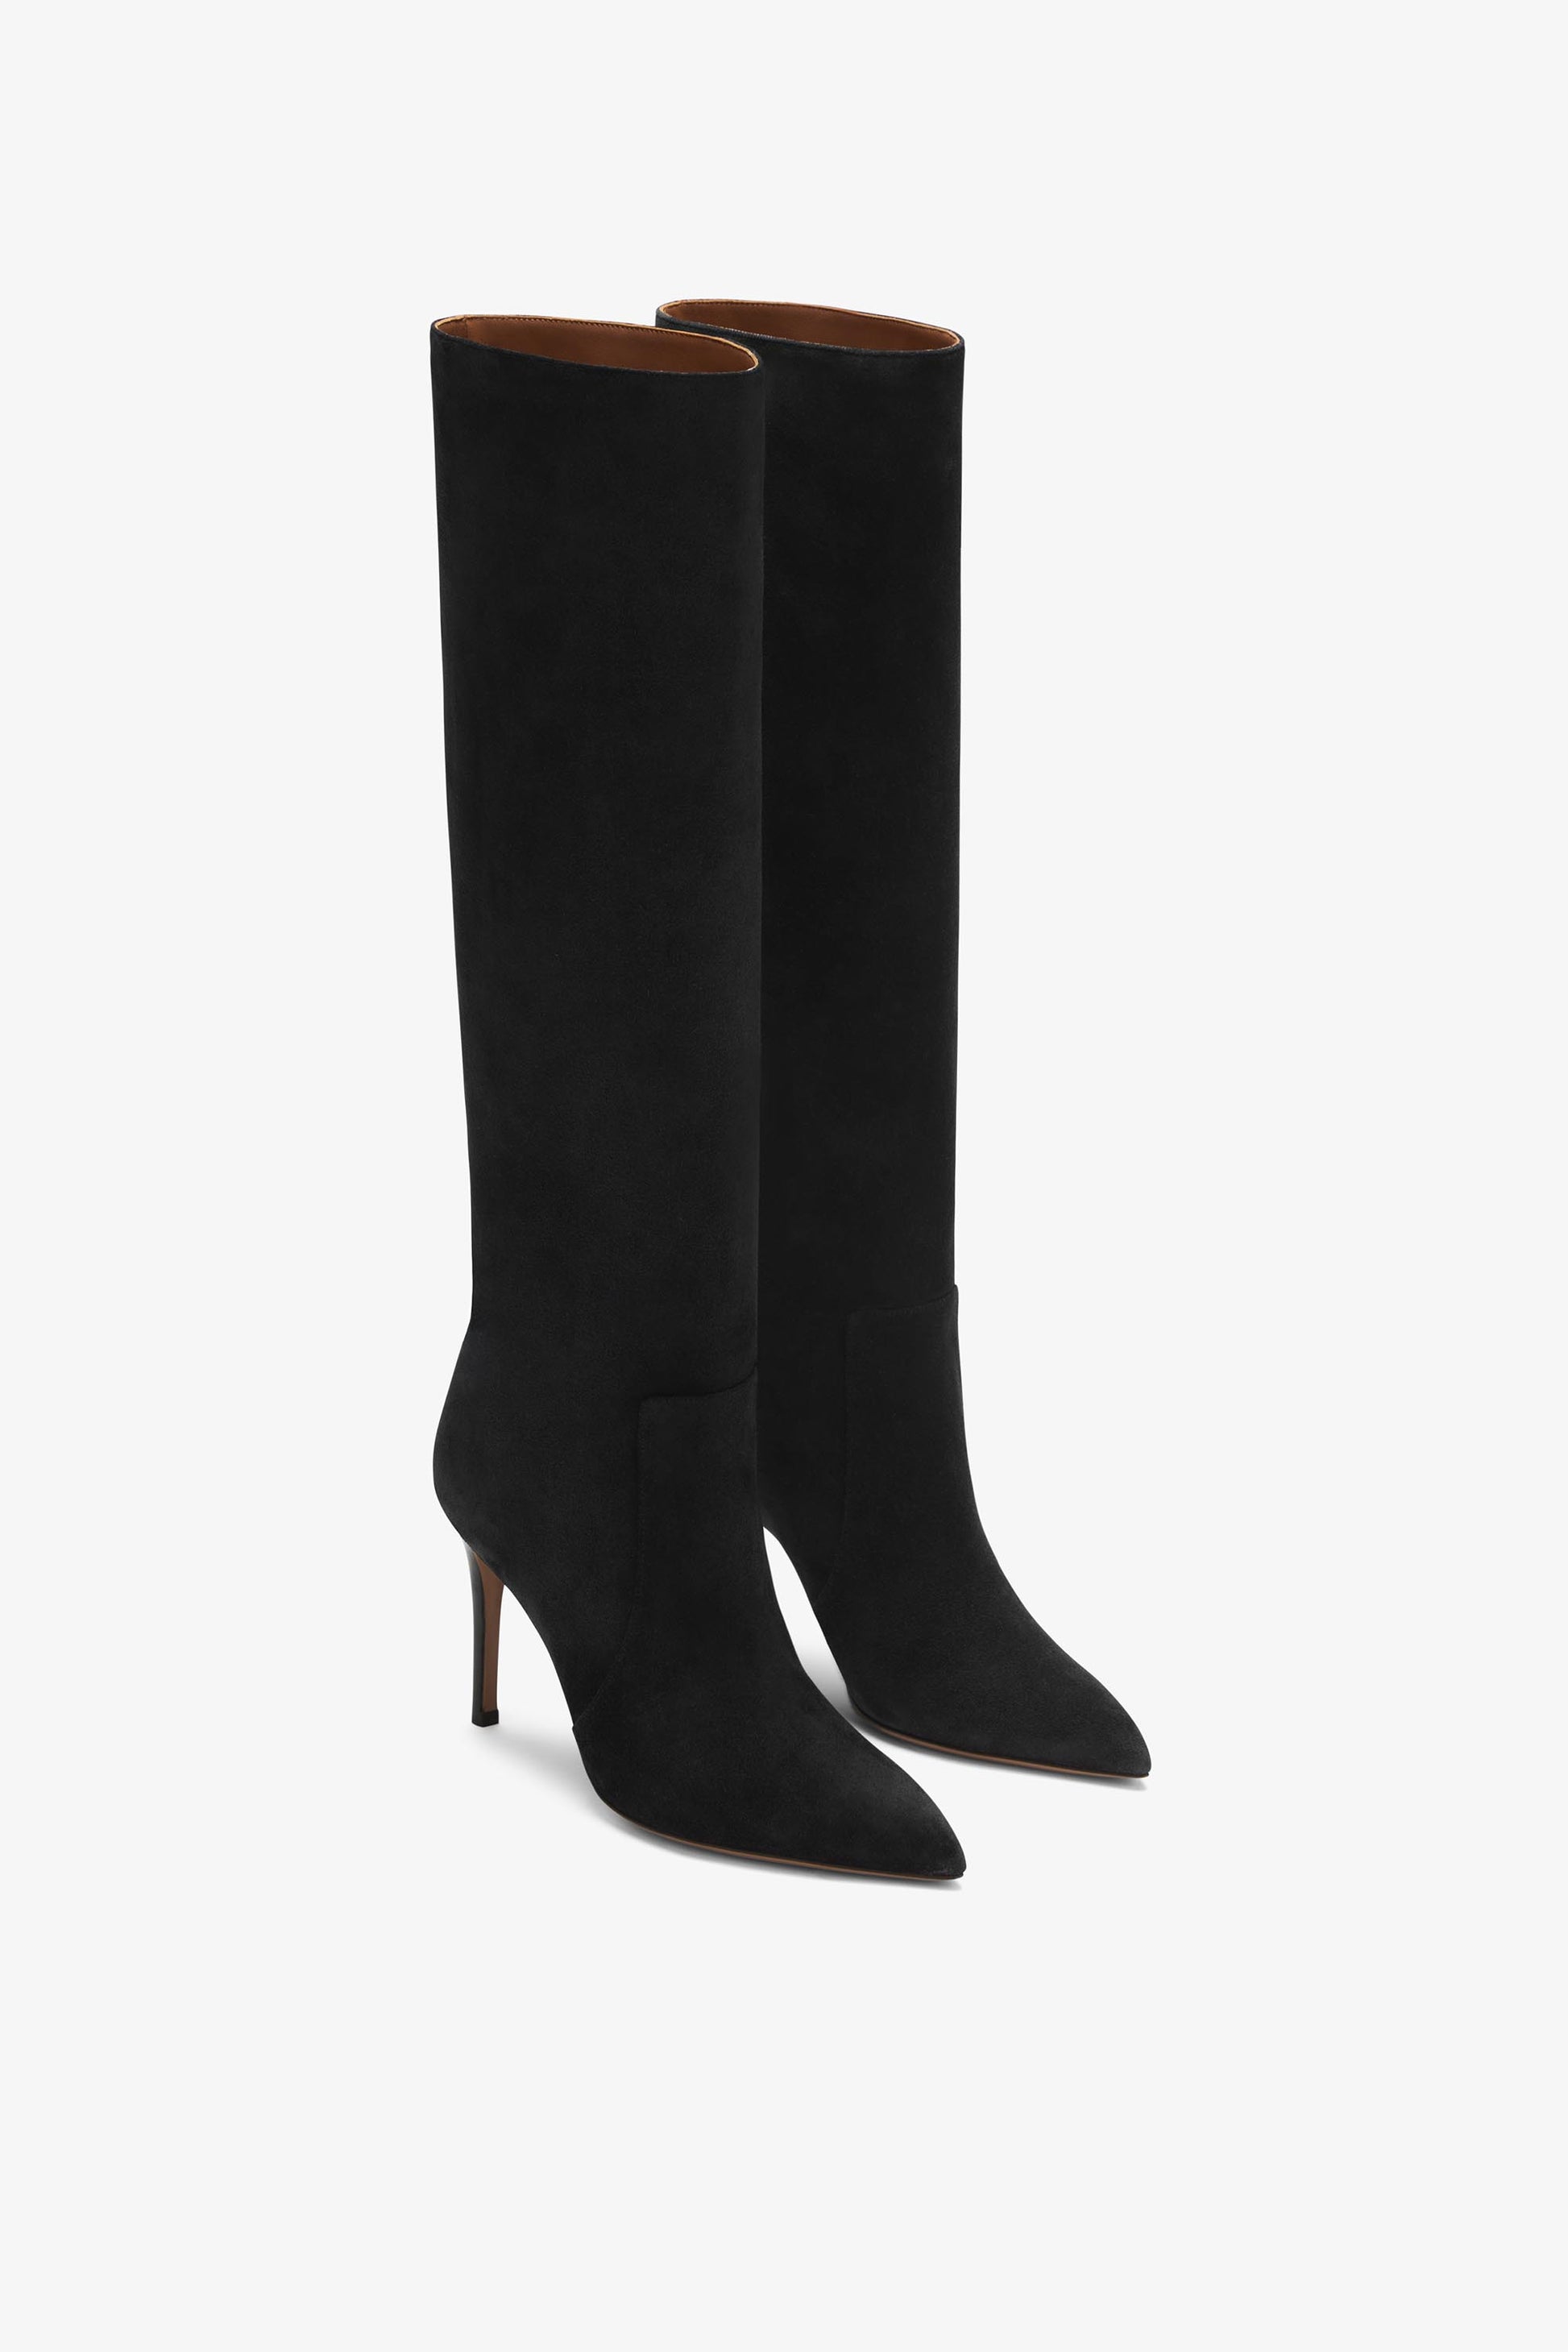 Black suede  boot